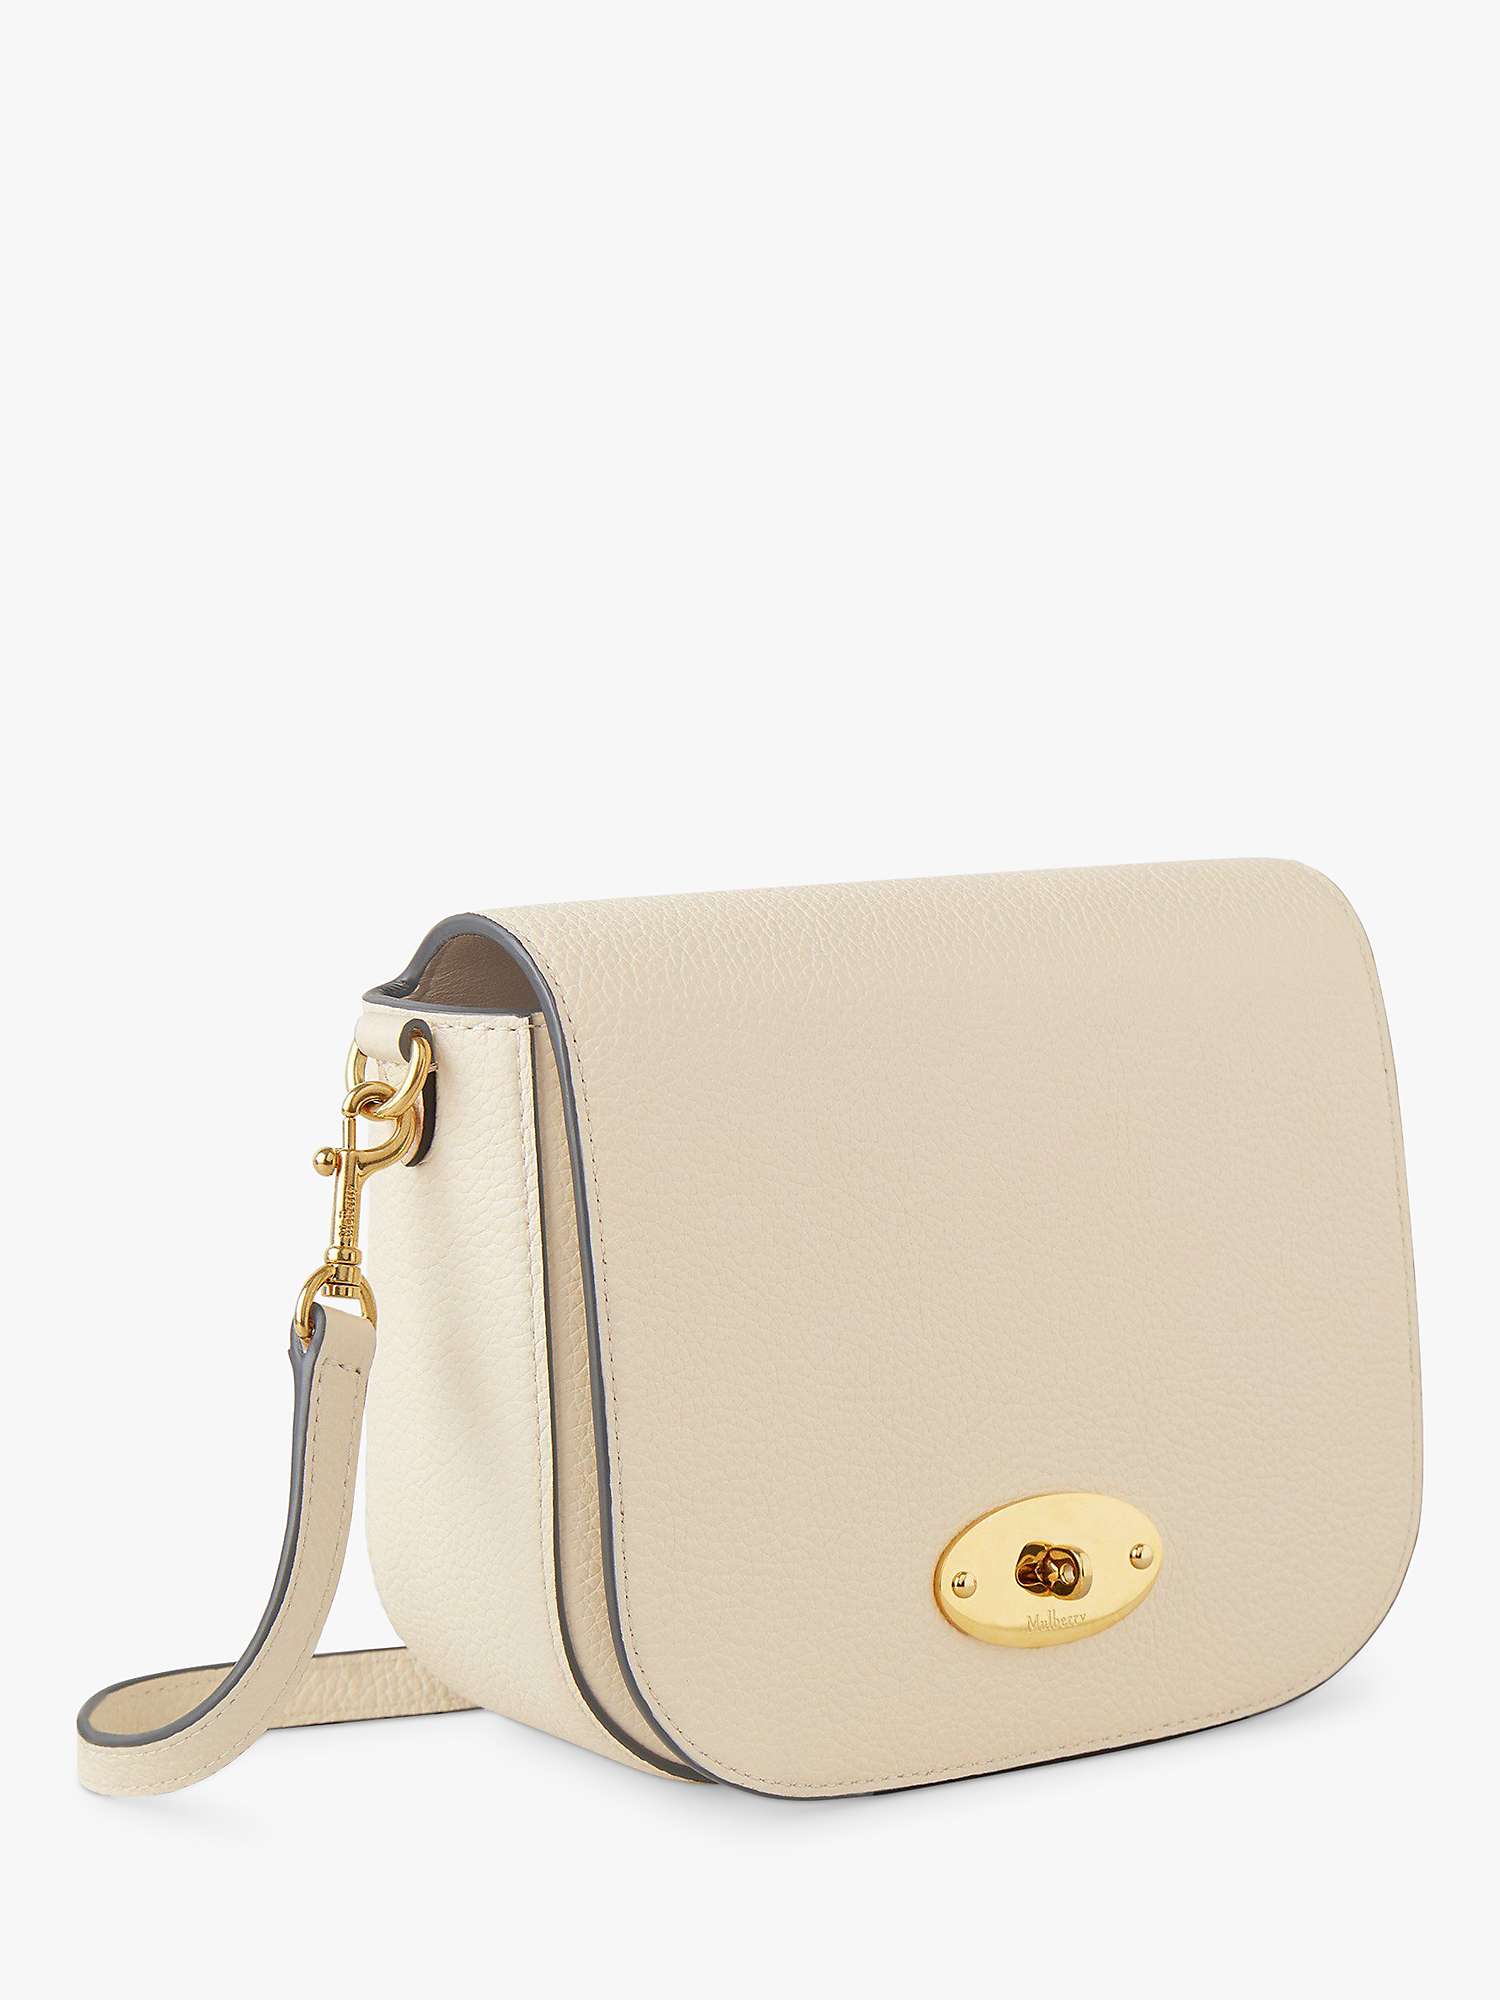 Buy Mulberry Small Darley Classic Grain Leather Satchel Online at johnlewis.com